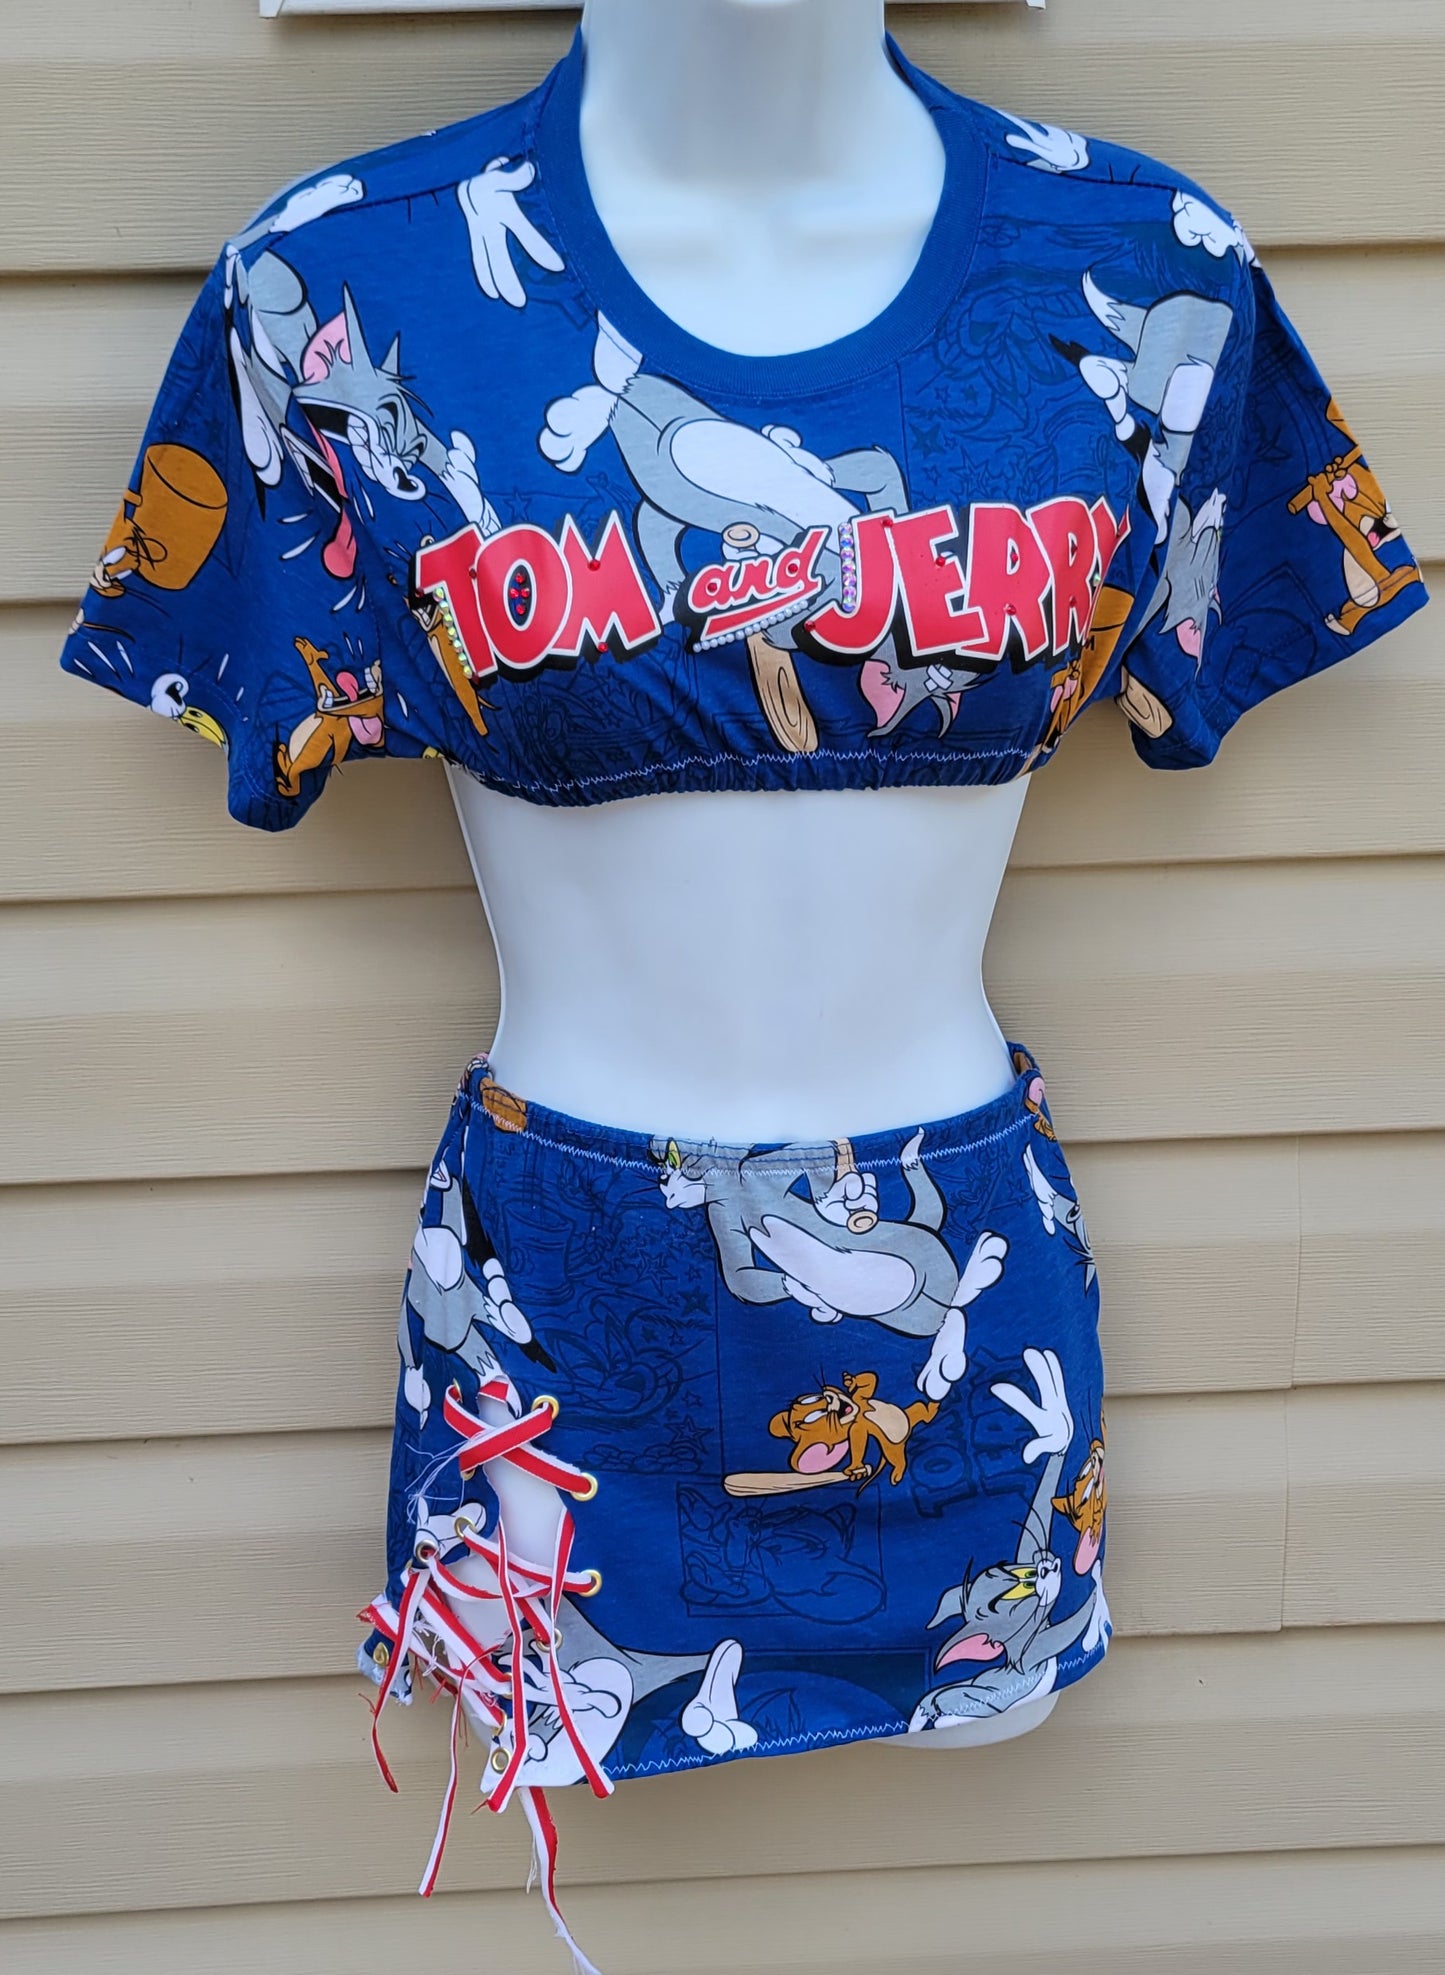 TOM and JERRY Ladies Shirt 2 piece set size small- Ladies Classic Cartoon custom sewing